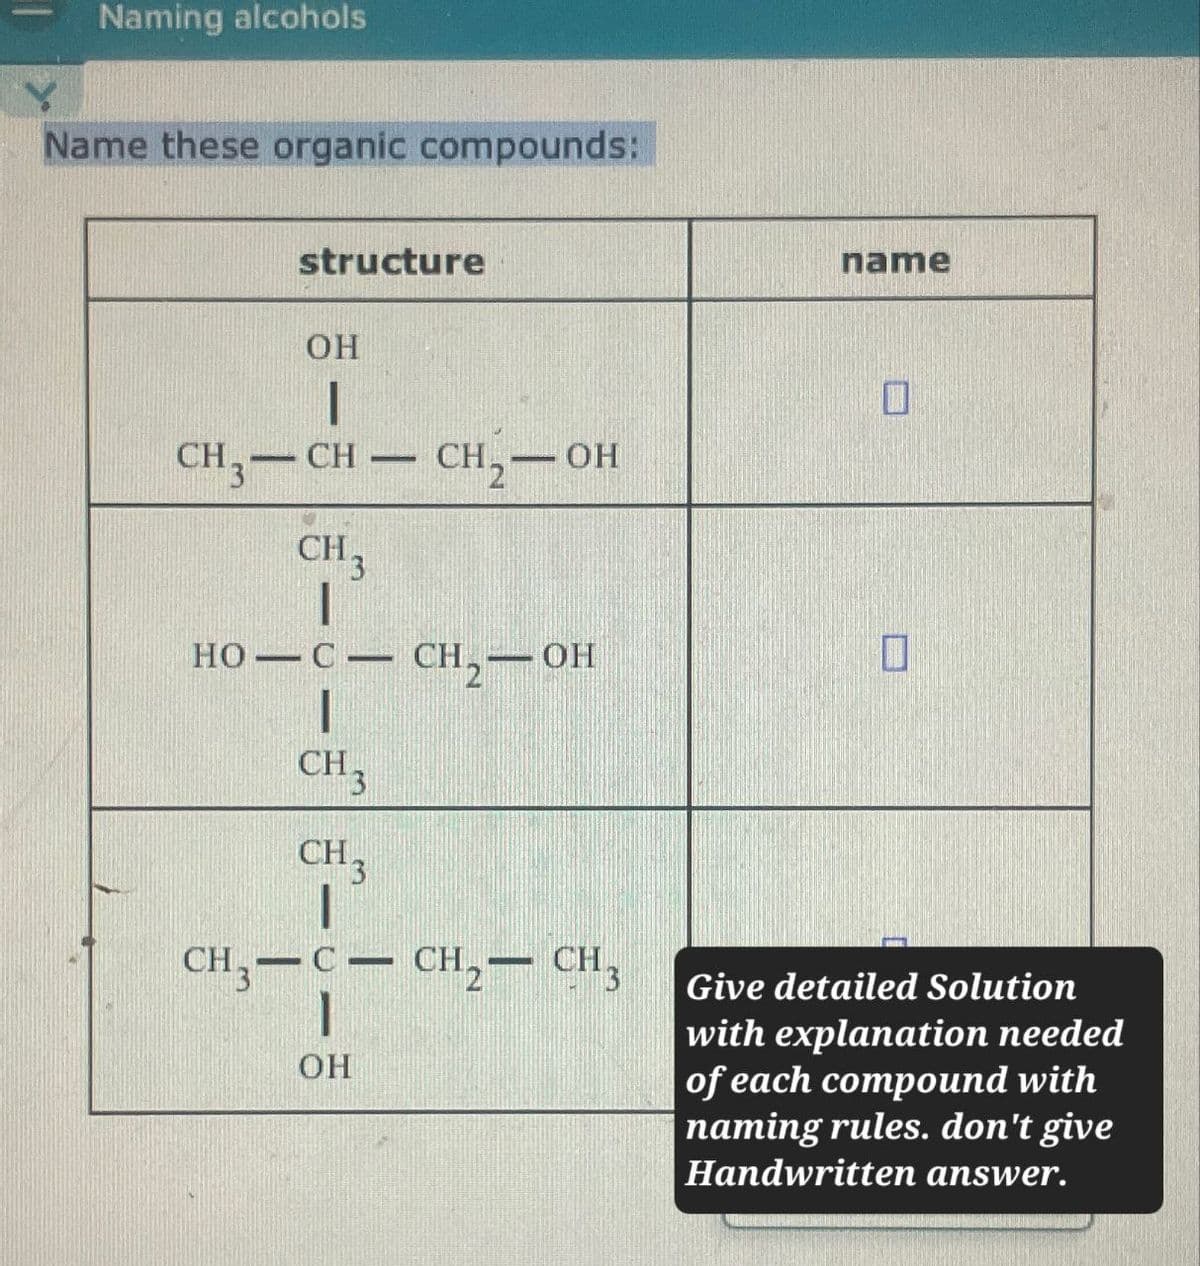 Naming alcohols
Name these organic compounds:
structure
OH
name
CH3-CH
CH 3
-
CH₂-OH
HO—C—CH 2 —OH
CH3
CH3
CH3-C-CH2-CH3
OH
☐
Give detailed Solution
with explanation needed
of each compound with
naming rules. don't give
Handwritten answer.